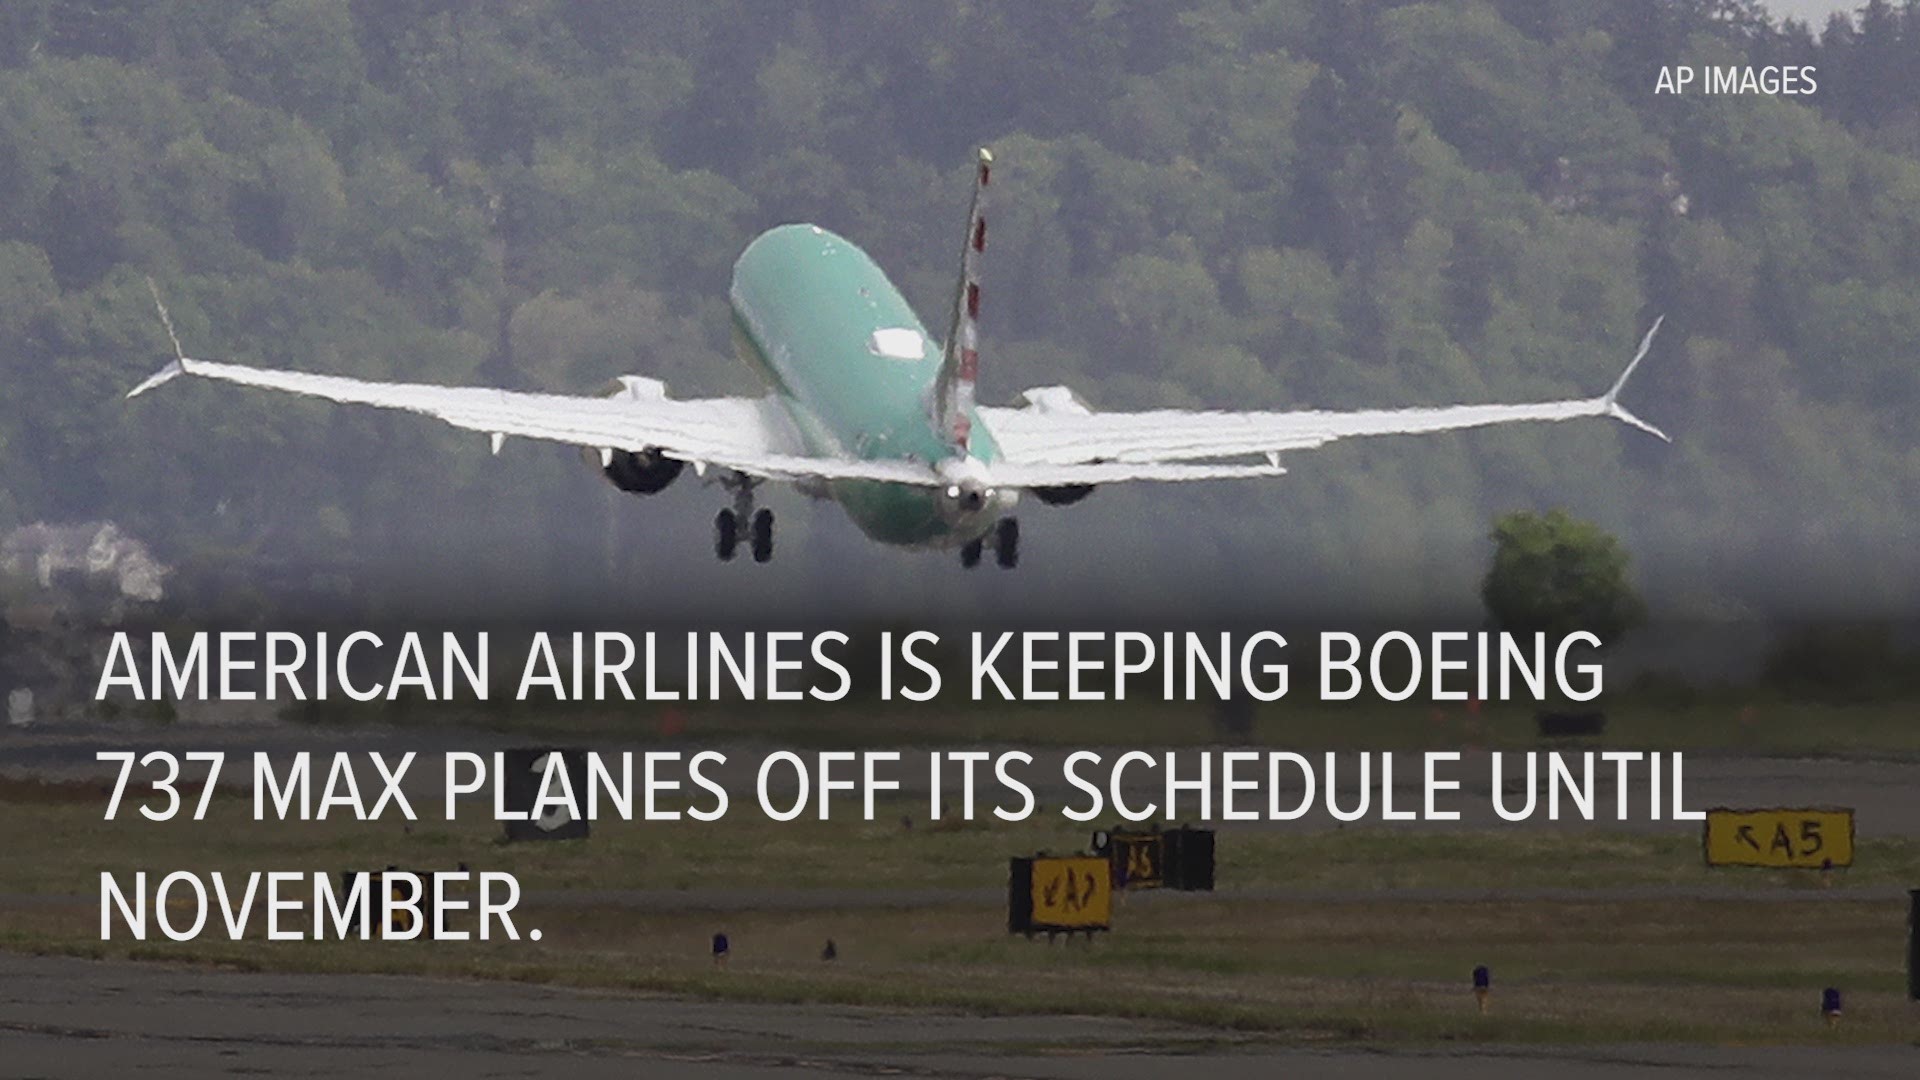 Boeing 737 Max 8 planes delayed at least through December by American Airlines.